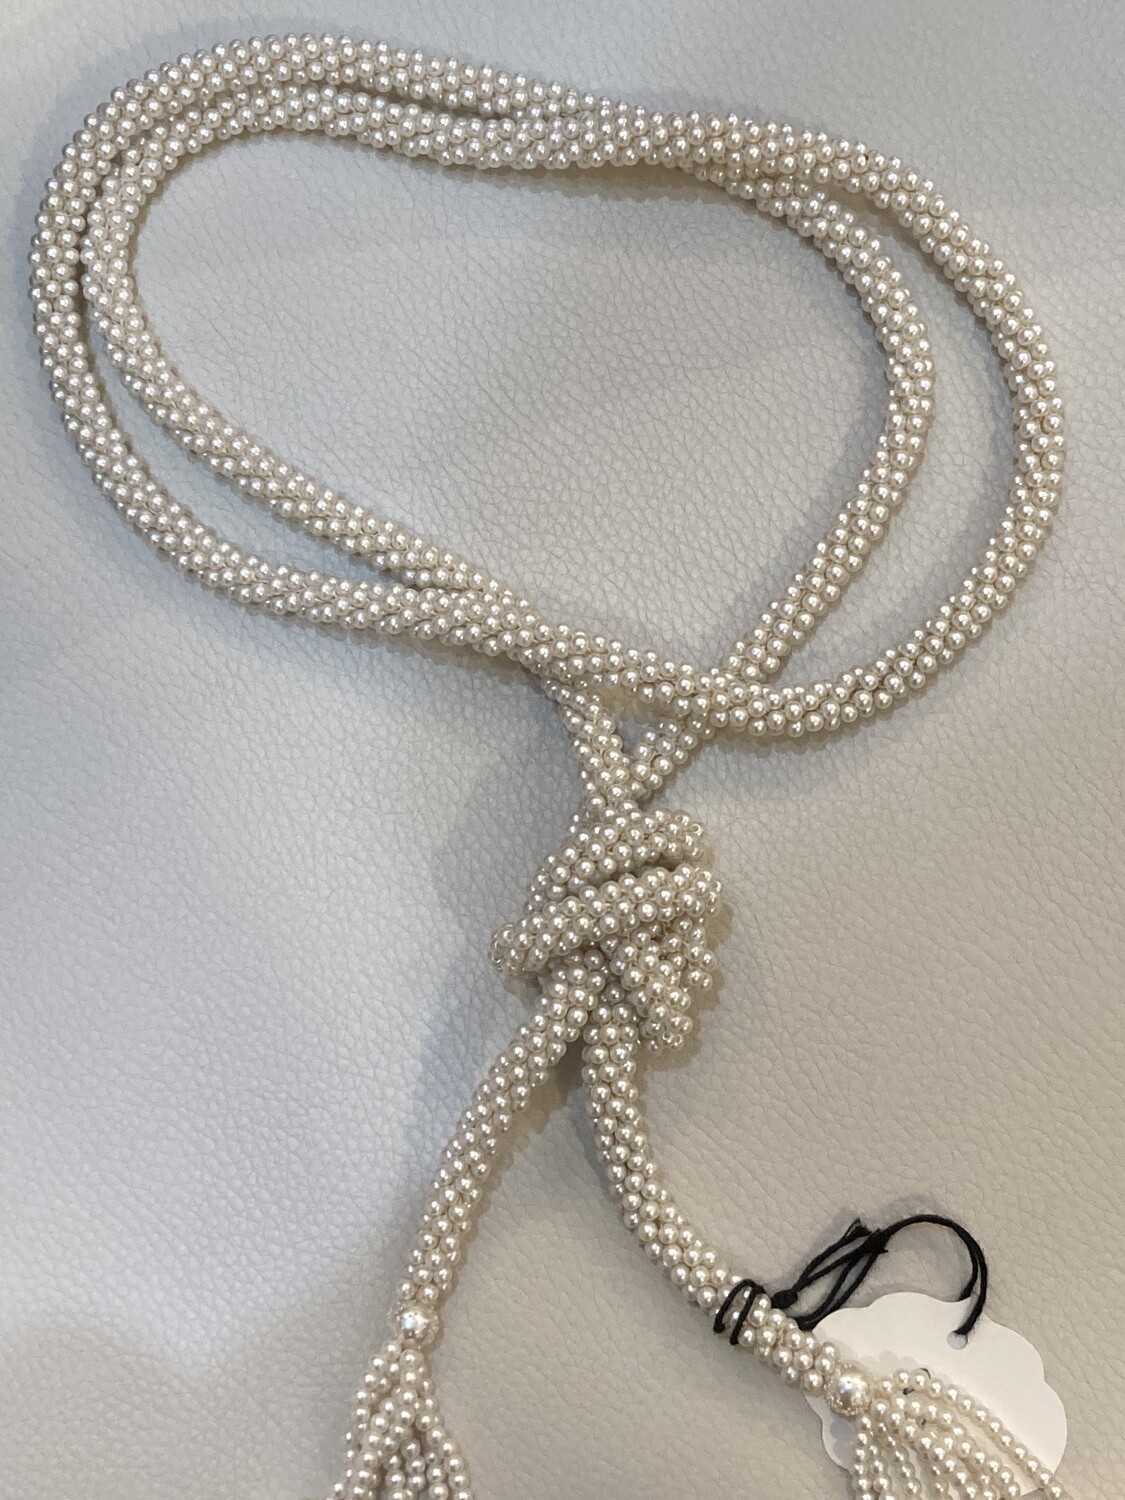 Vintage 53” Faux Pearl String Necklace